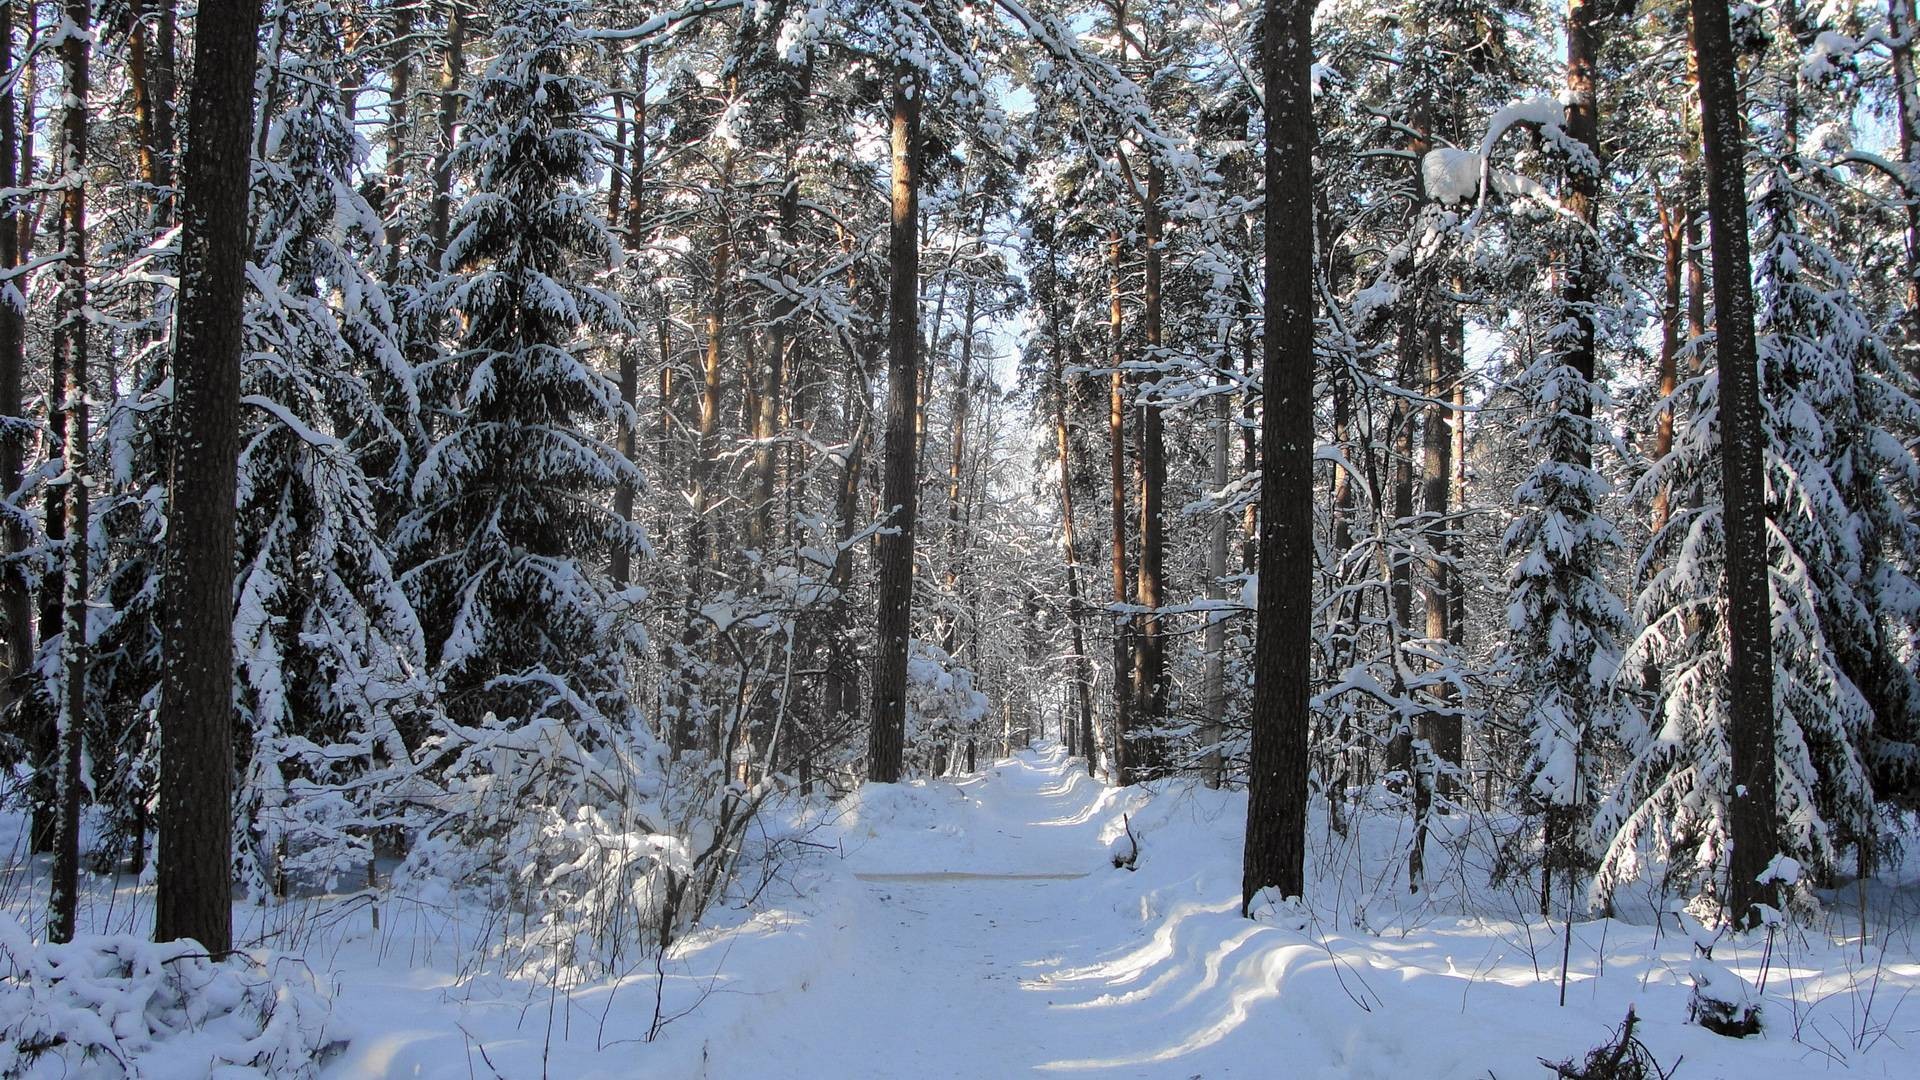 General 1920x1080 snow winter forest path nature trees